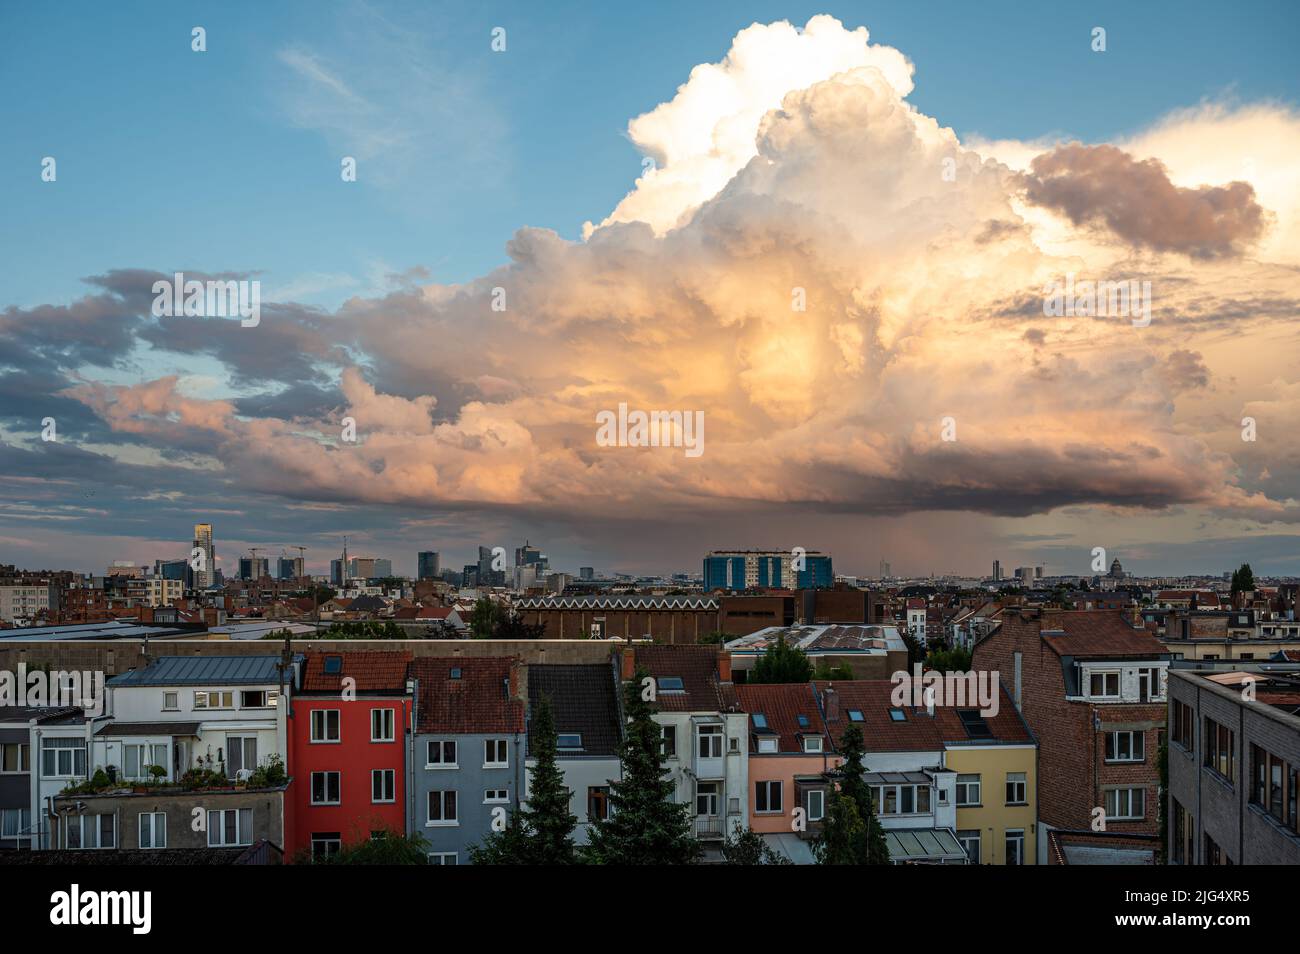 Jette, Brussels Capital Region, Belgium - 06 26 2022 - Panoramic cityscape view during the golden hour with a large cumulus cloud Stock Photo